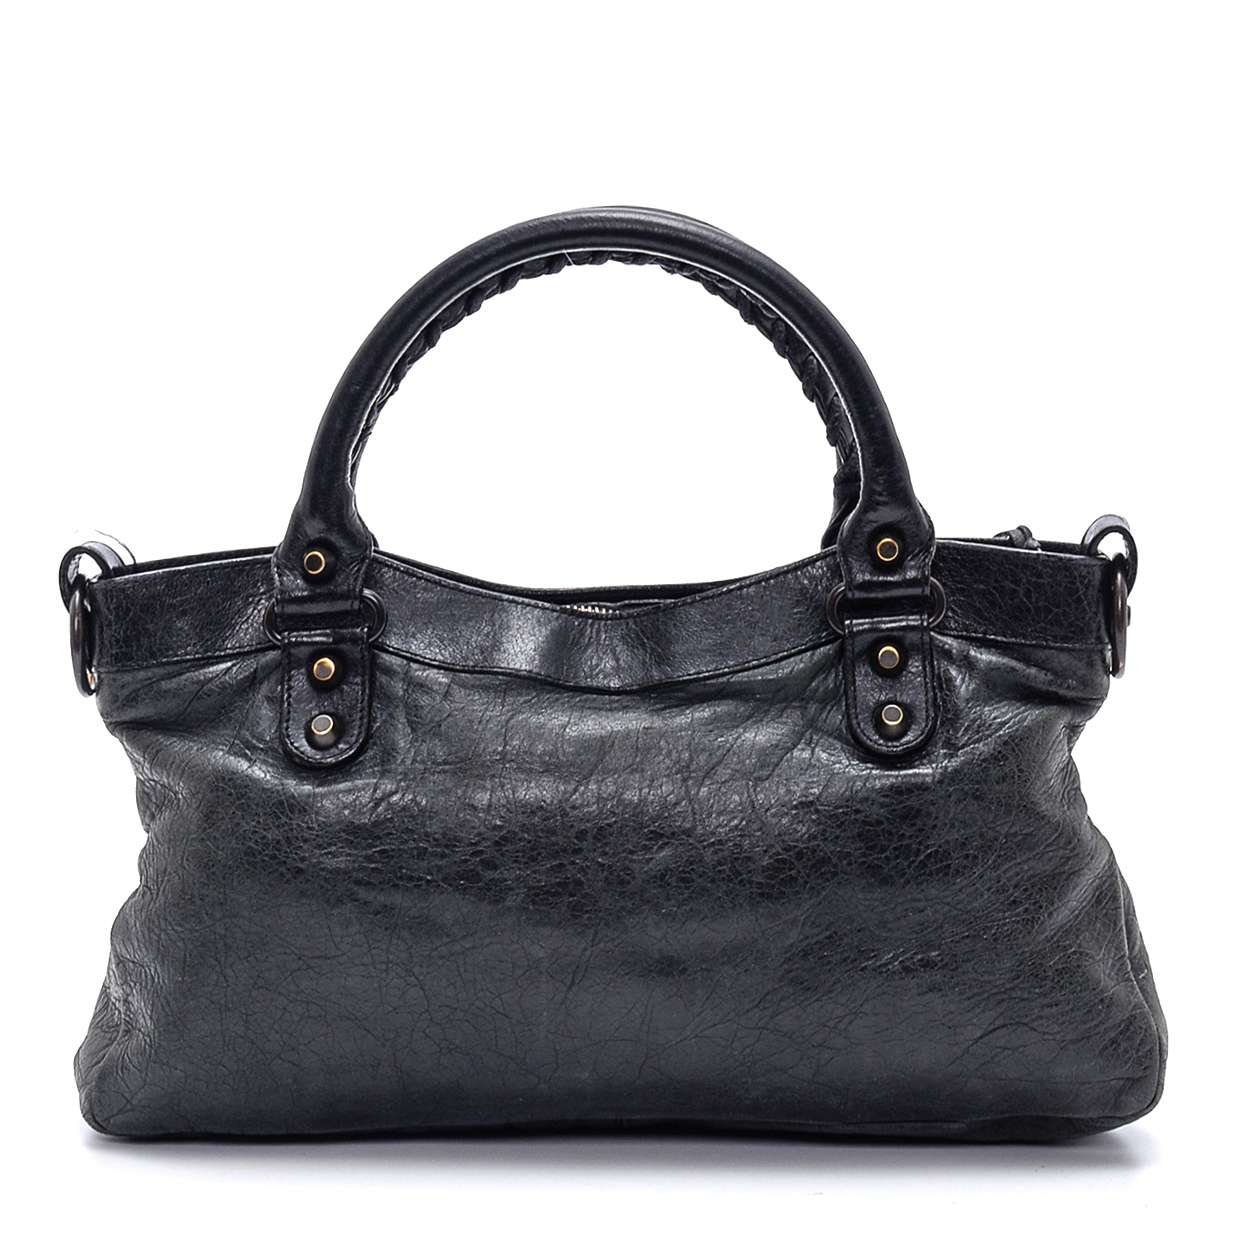 Balenciaga - Anthracite Leather Small Motorcycle City Bag